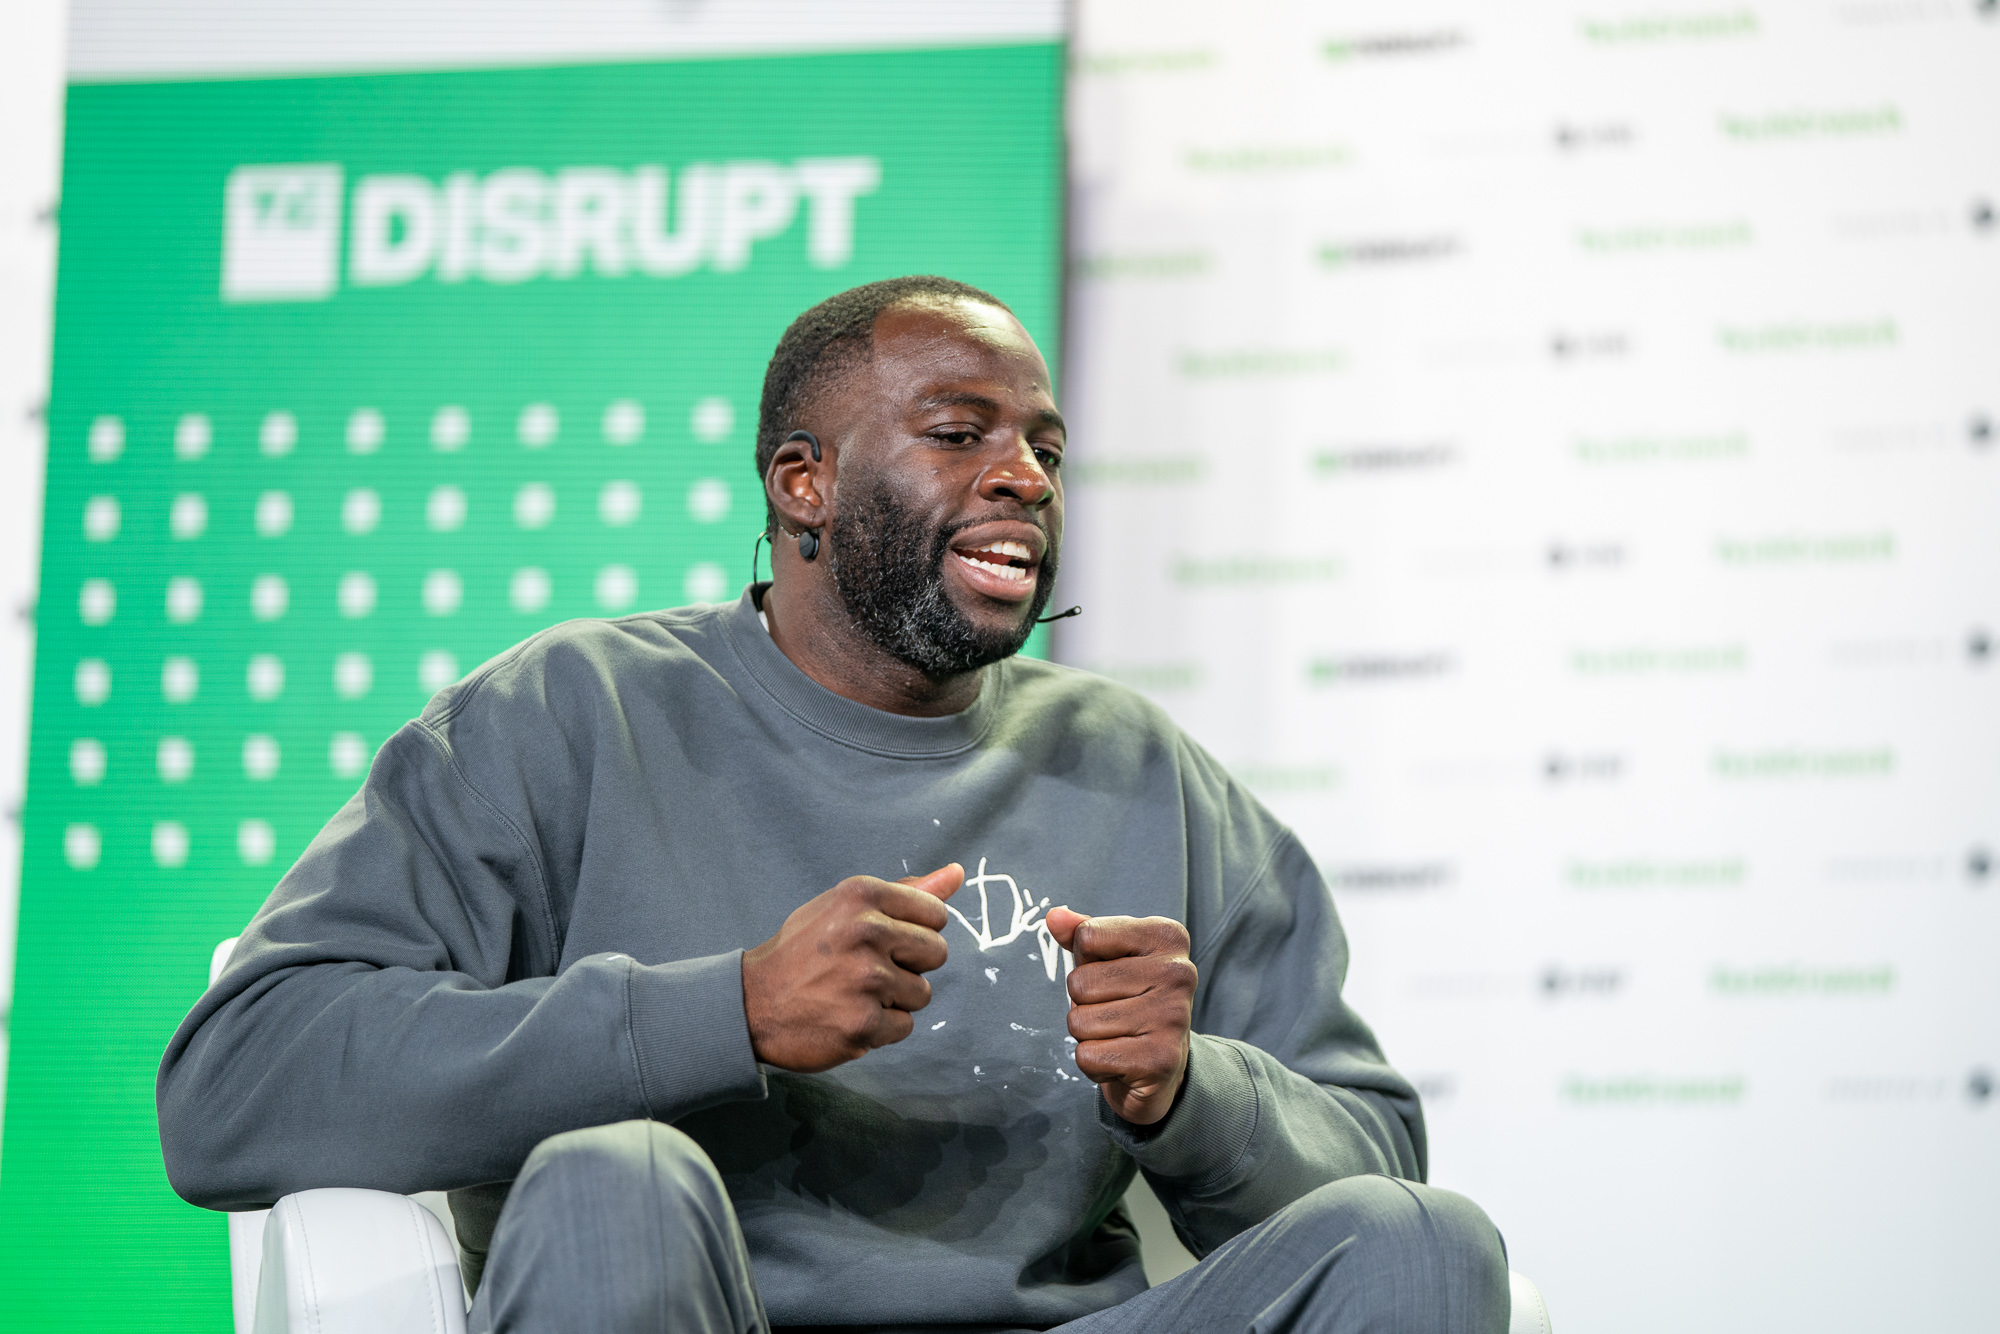 The Warriors’ Draymond Green talks podcasts, social media and the elephant in the room